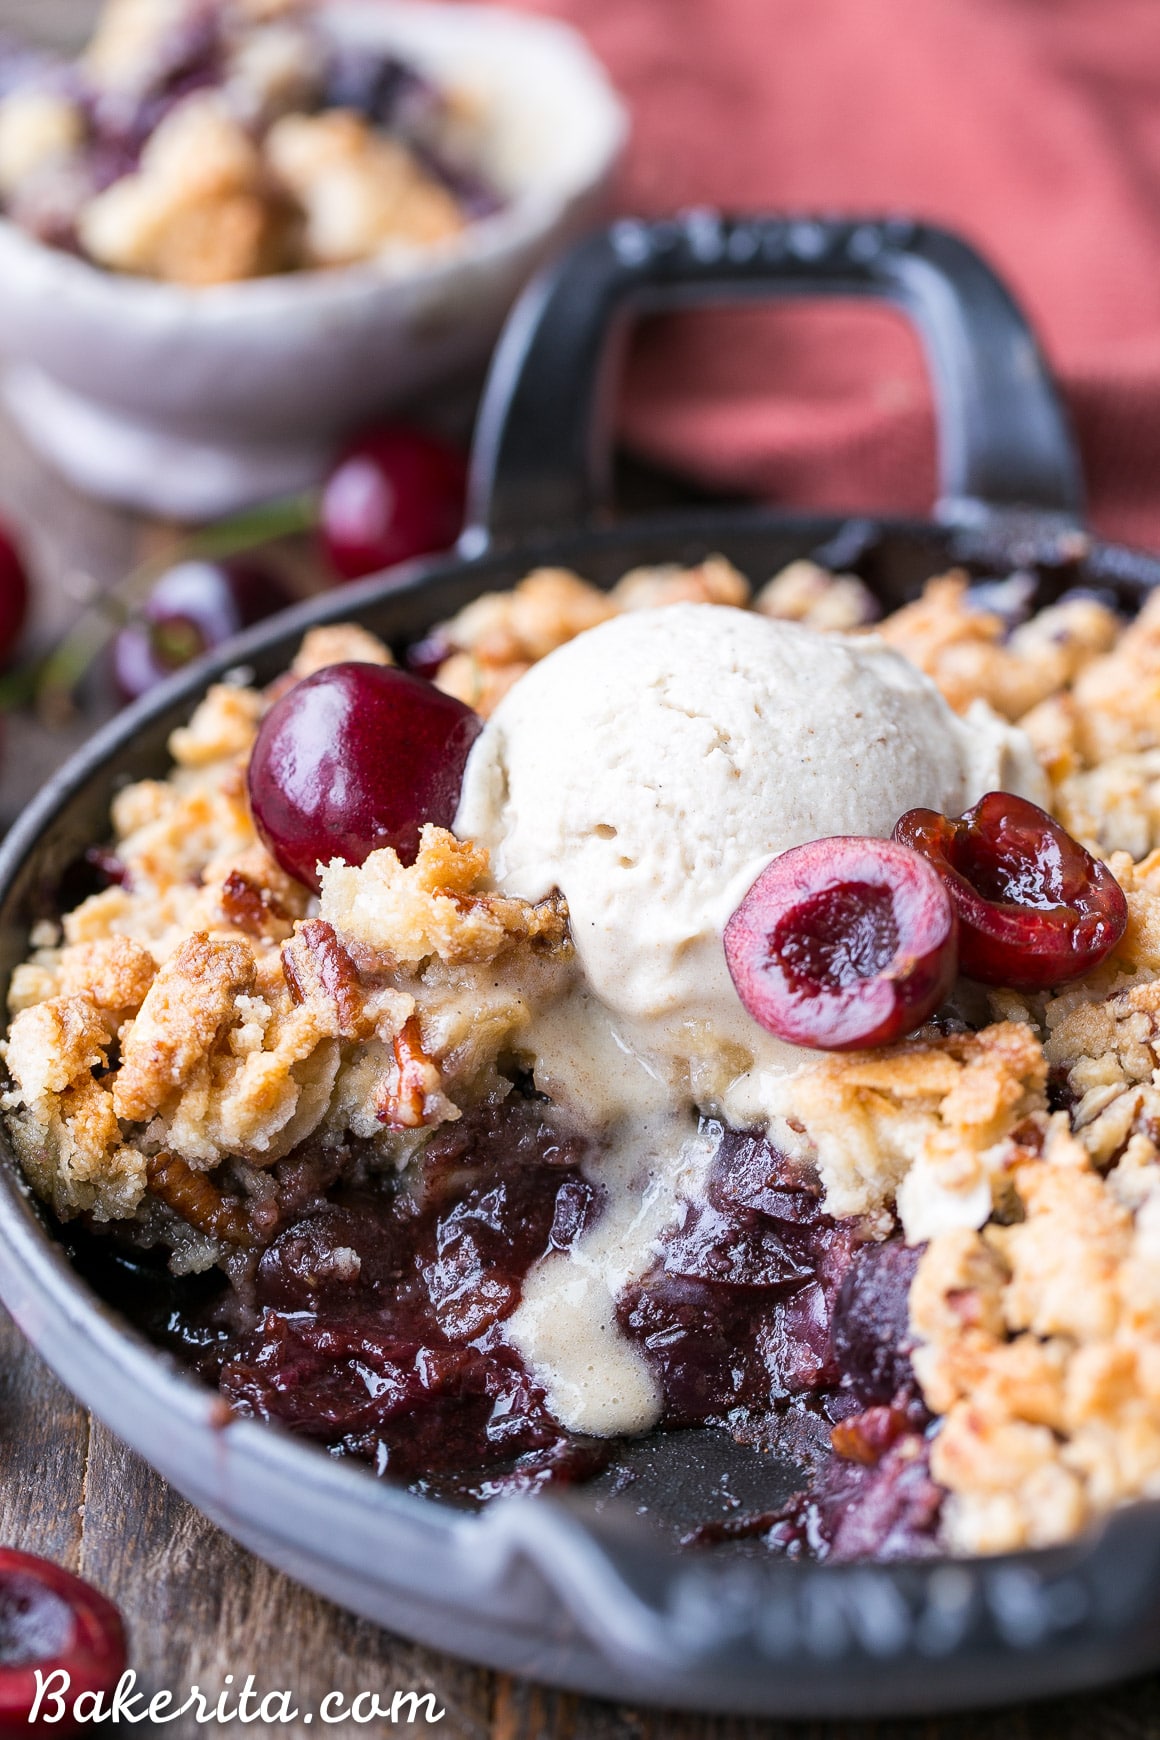 This Cherry Crisp has an irresistible grain-free crumble topping that will have your spoon diving in for more! It's a gluten-free, paleo, and vegan dessert that can be enjoyed all year round.